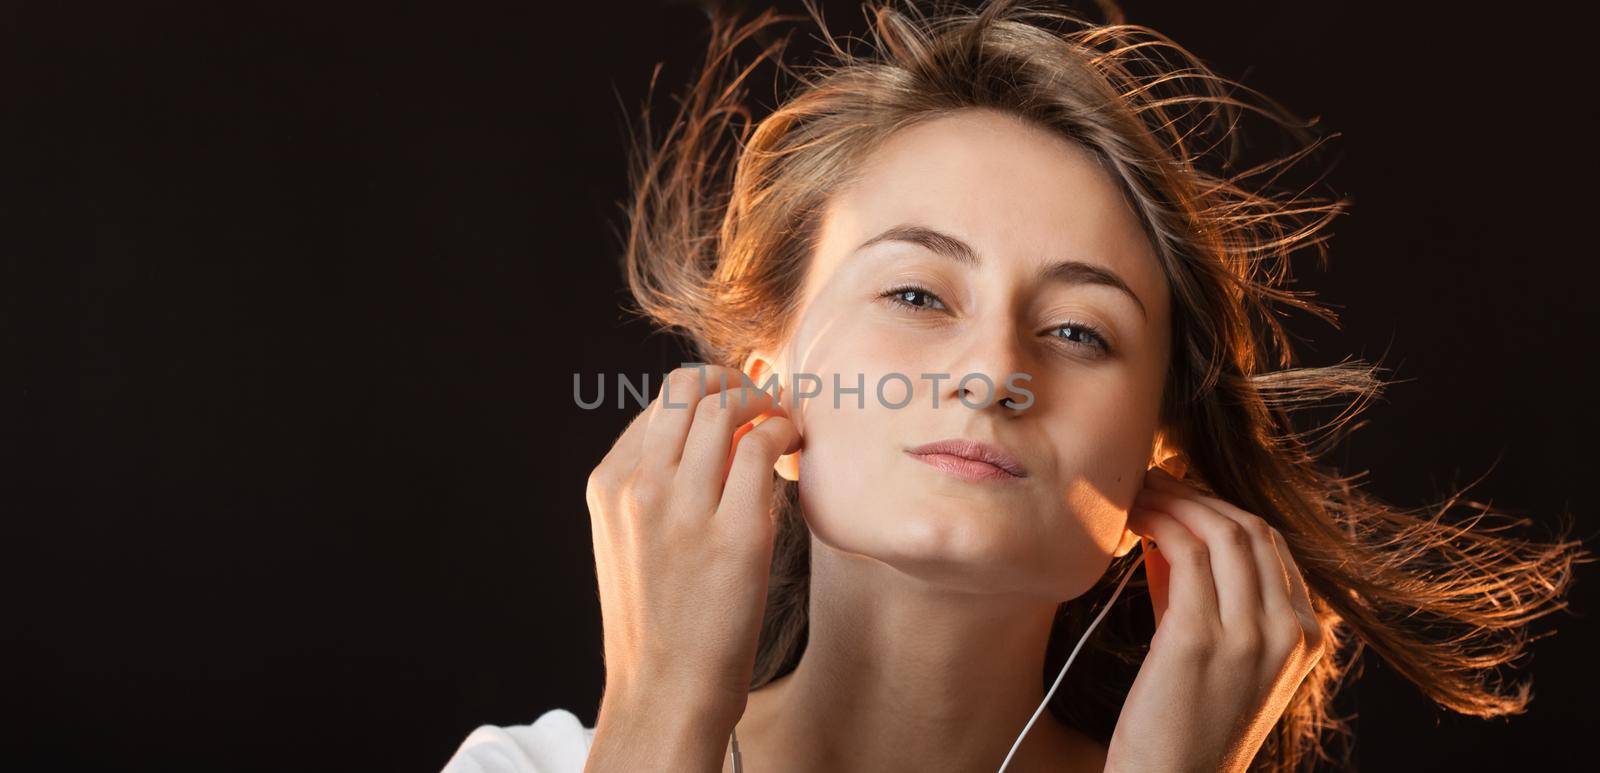 Beautiful Woman Listening Music on a dark background with copy-space